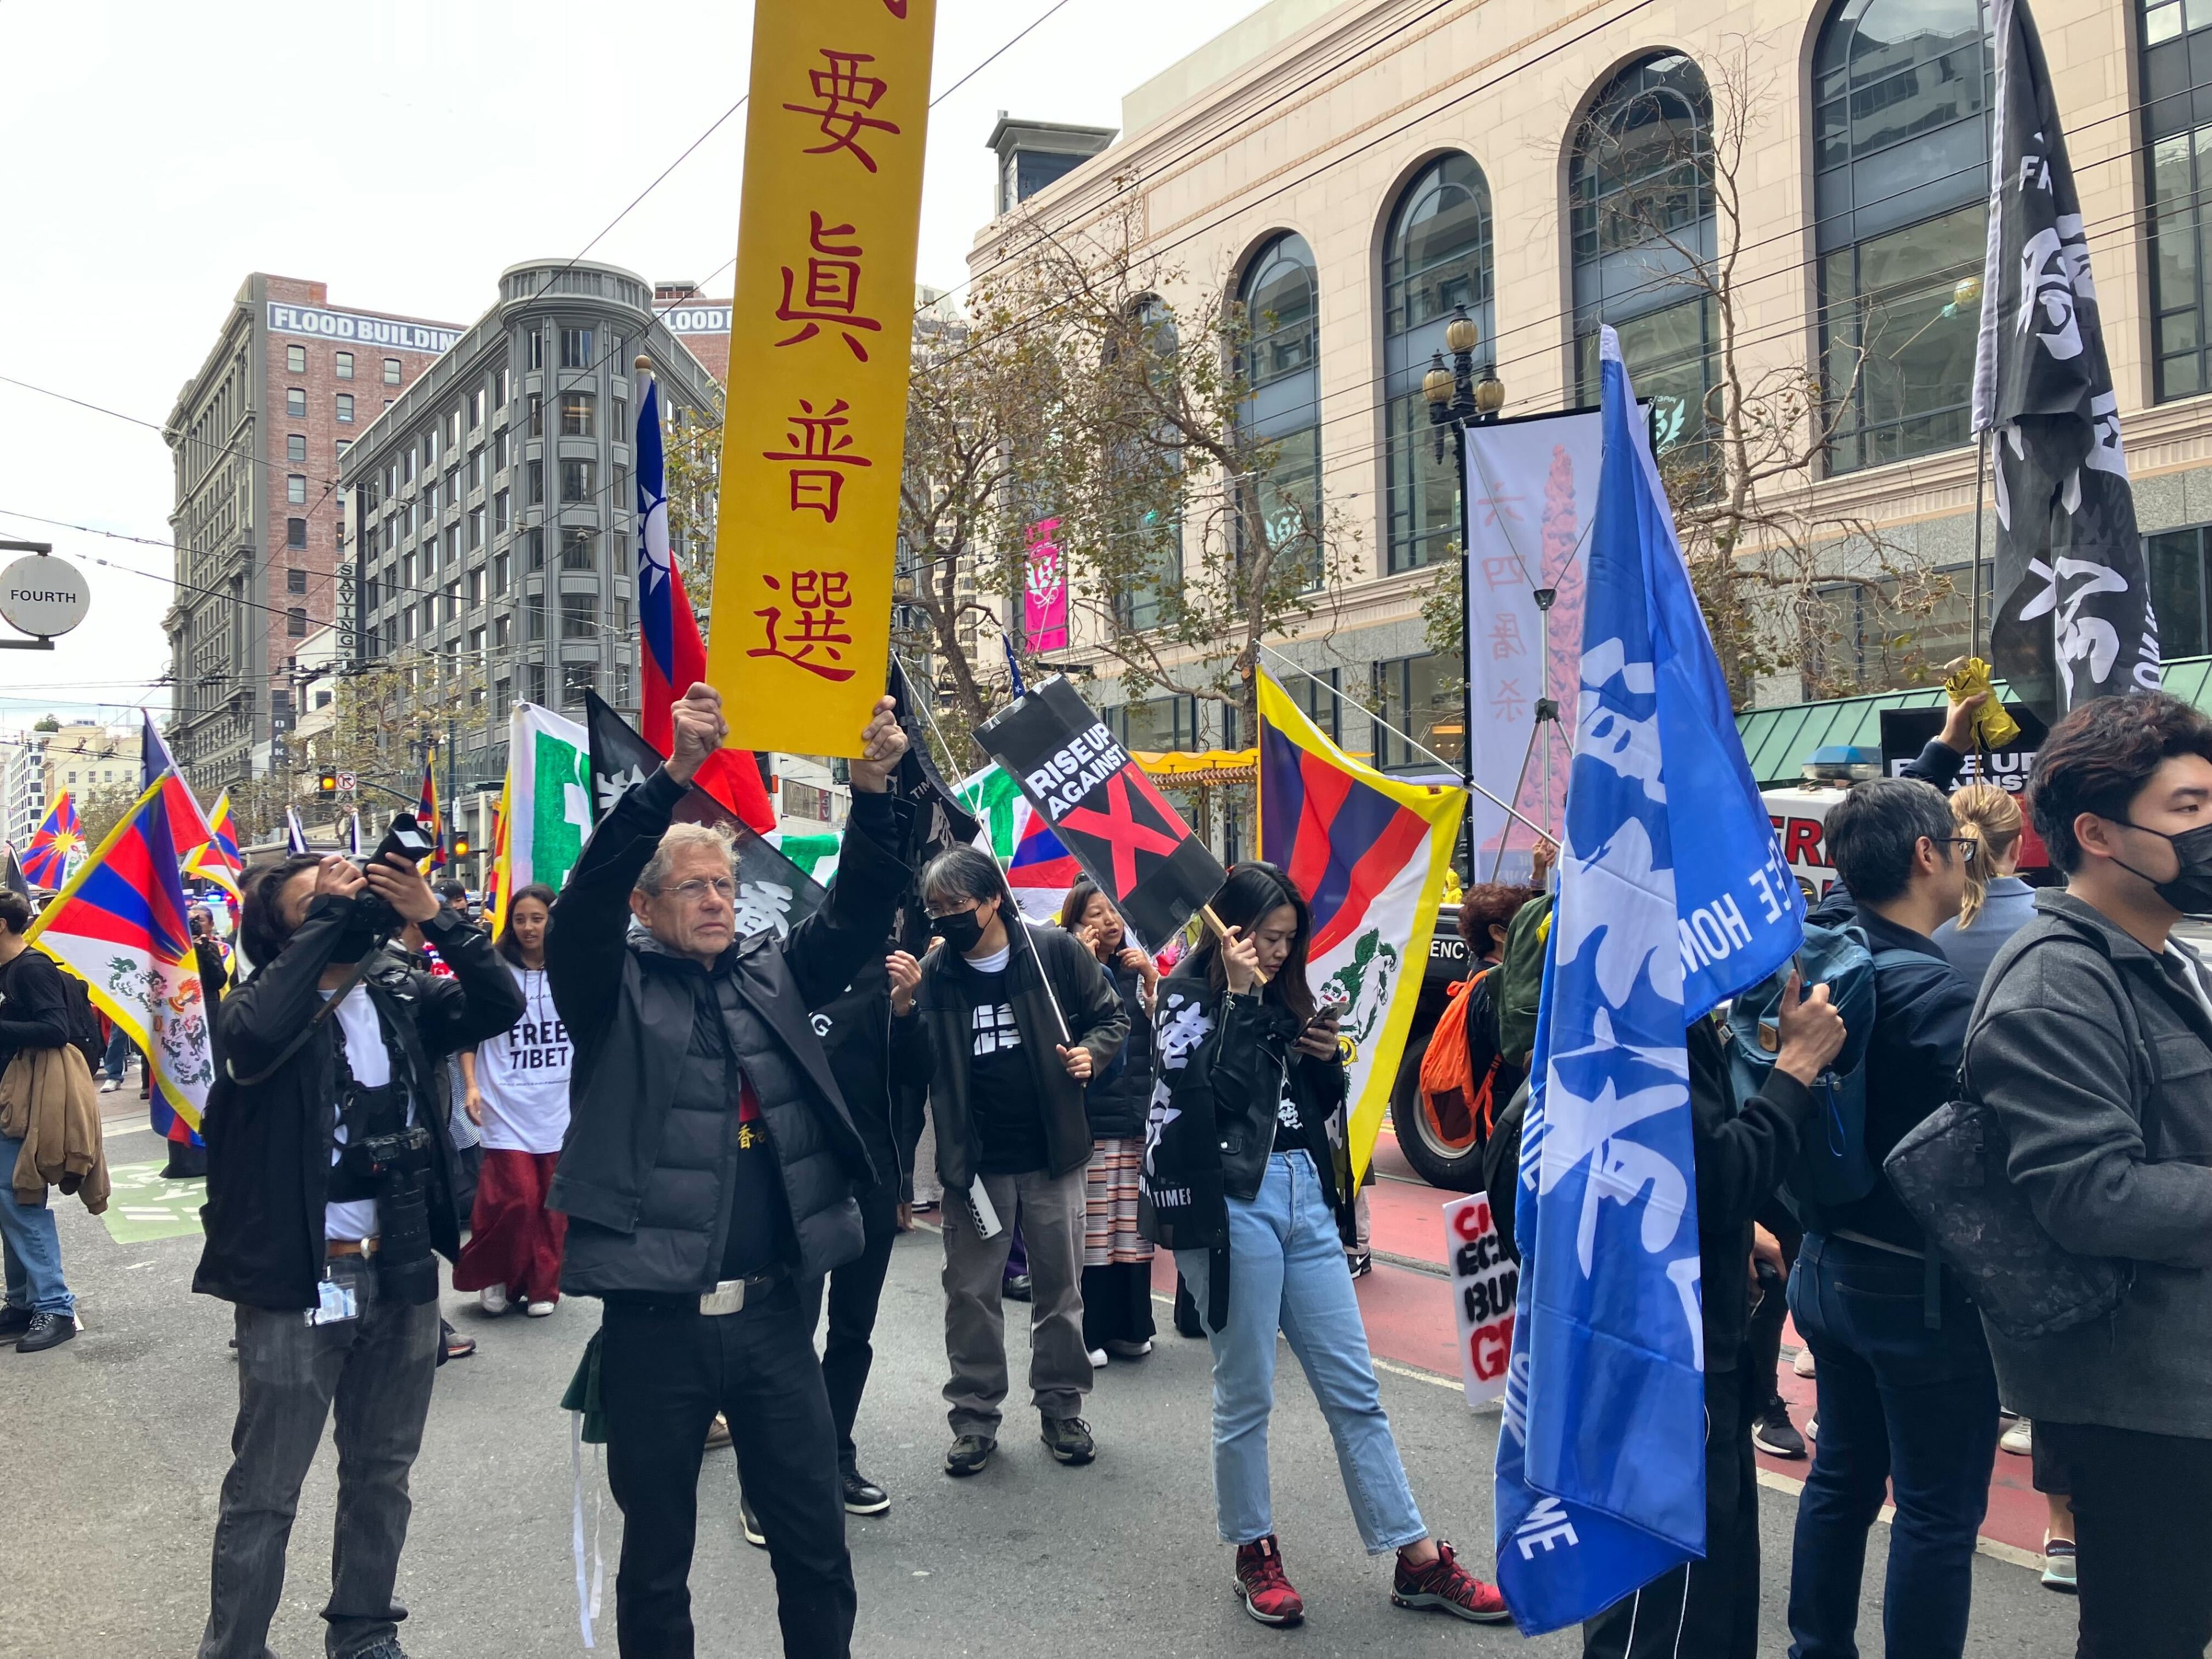 Protesters carrying colorful flags and signs in Chinese march down the street under cloudy skies.